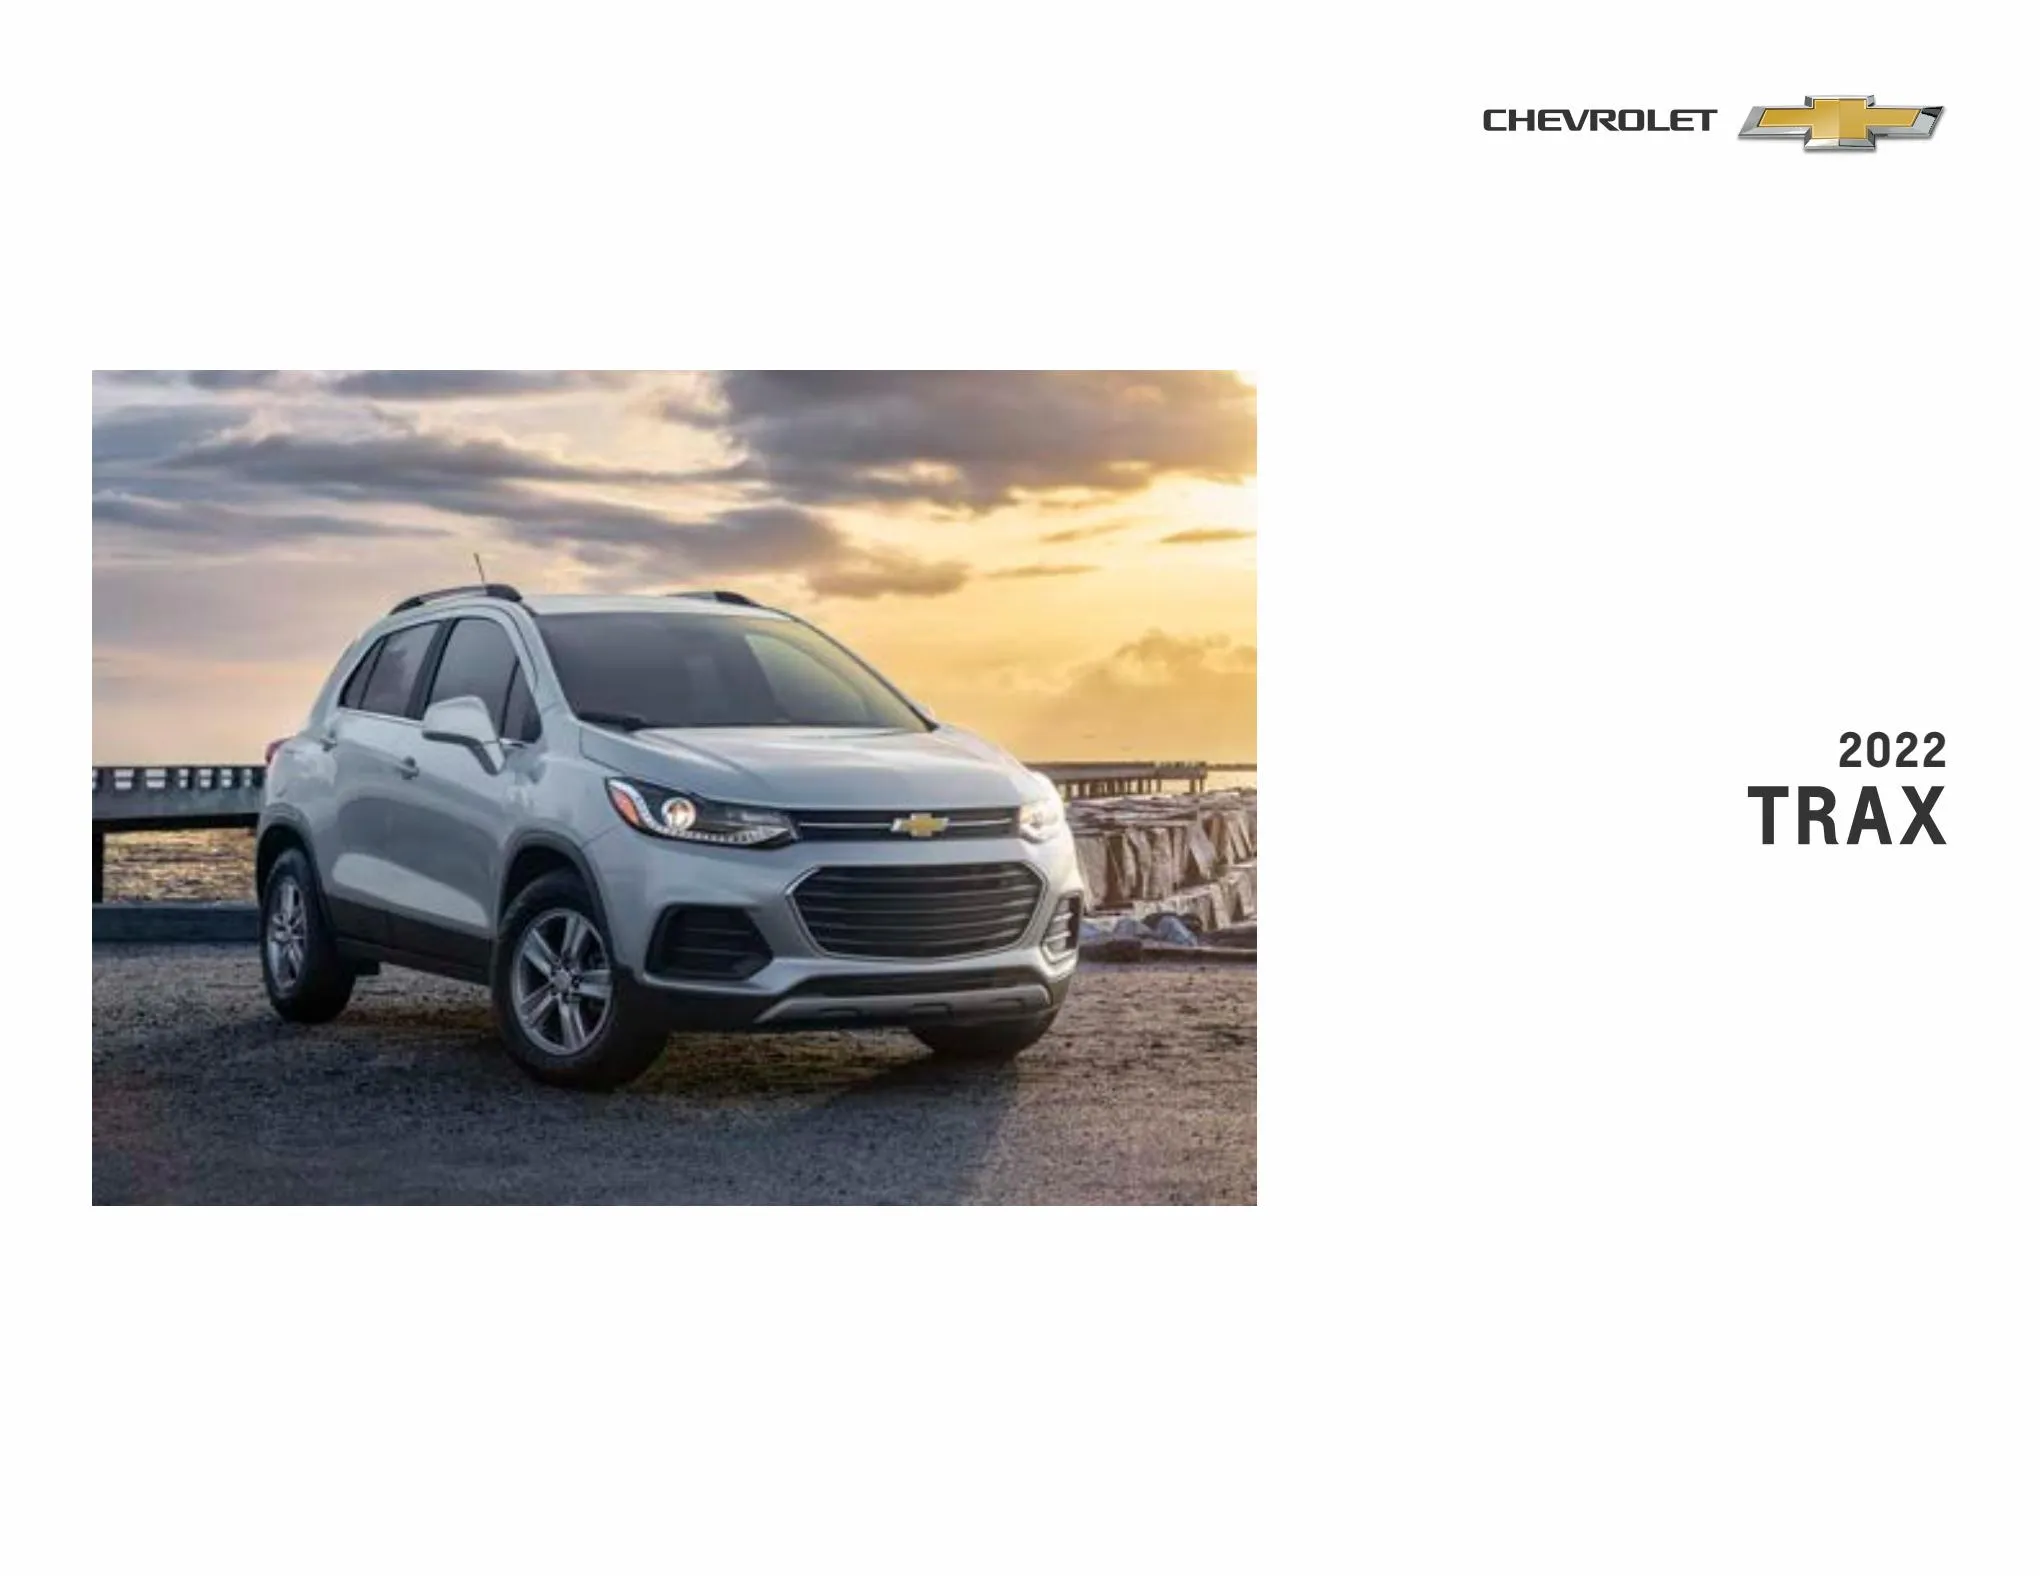 Catalogue Chevrolet Trax 2022, page 00001